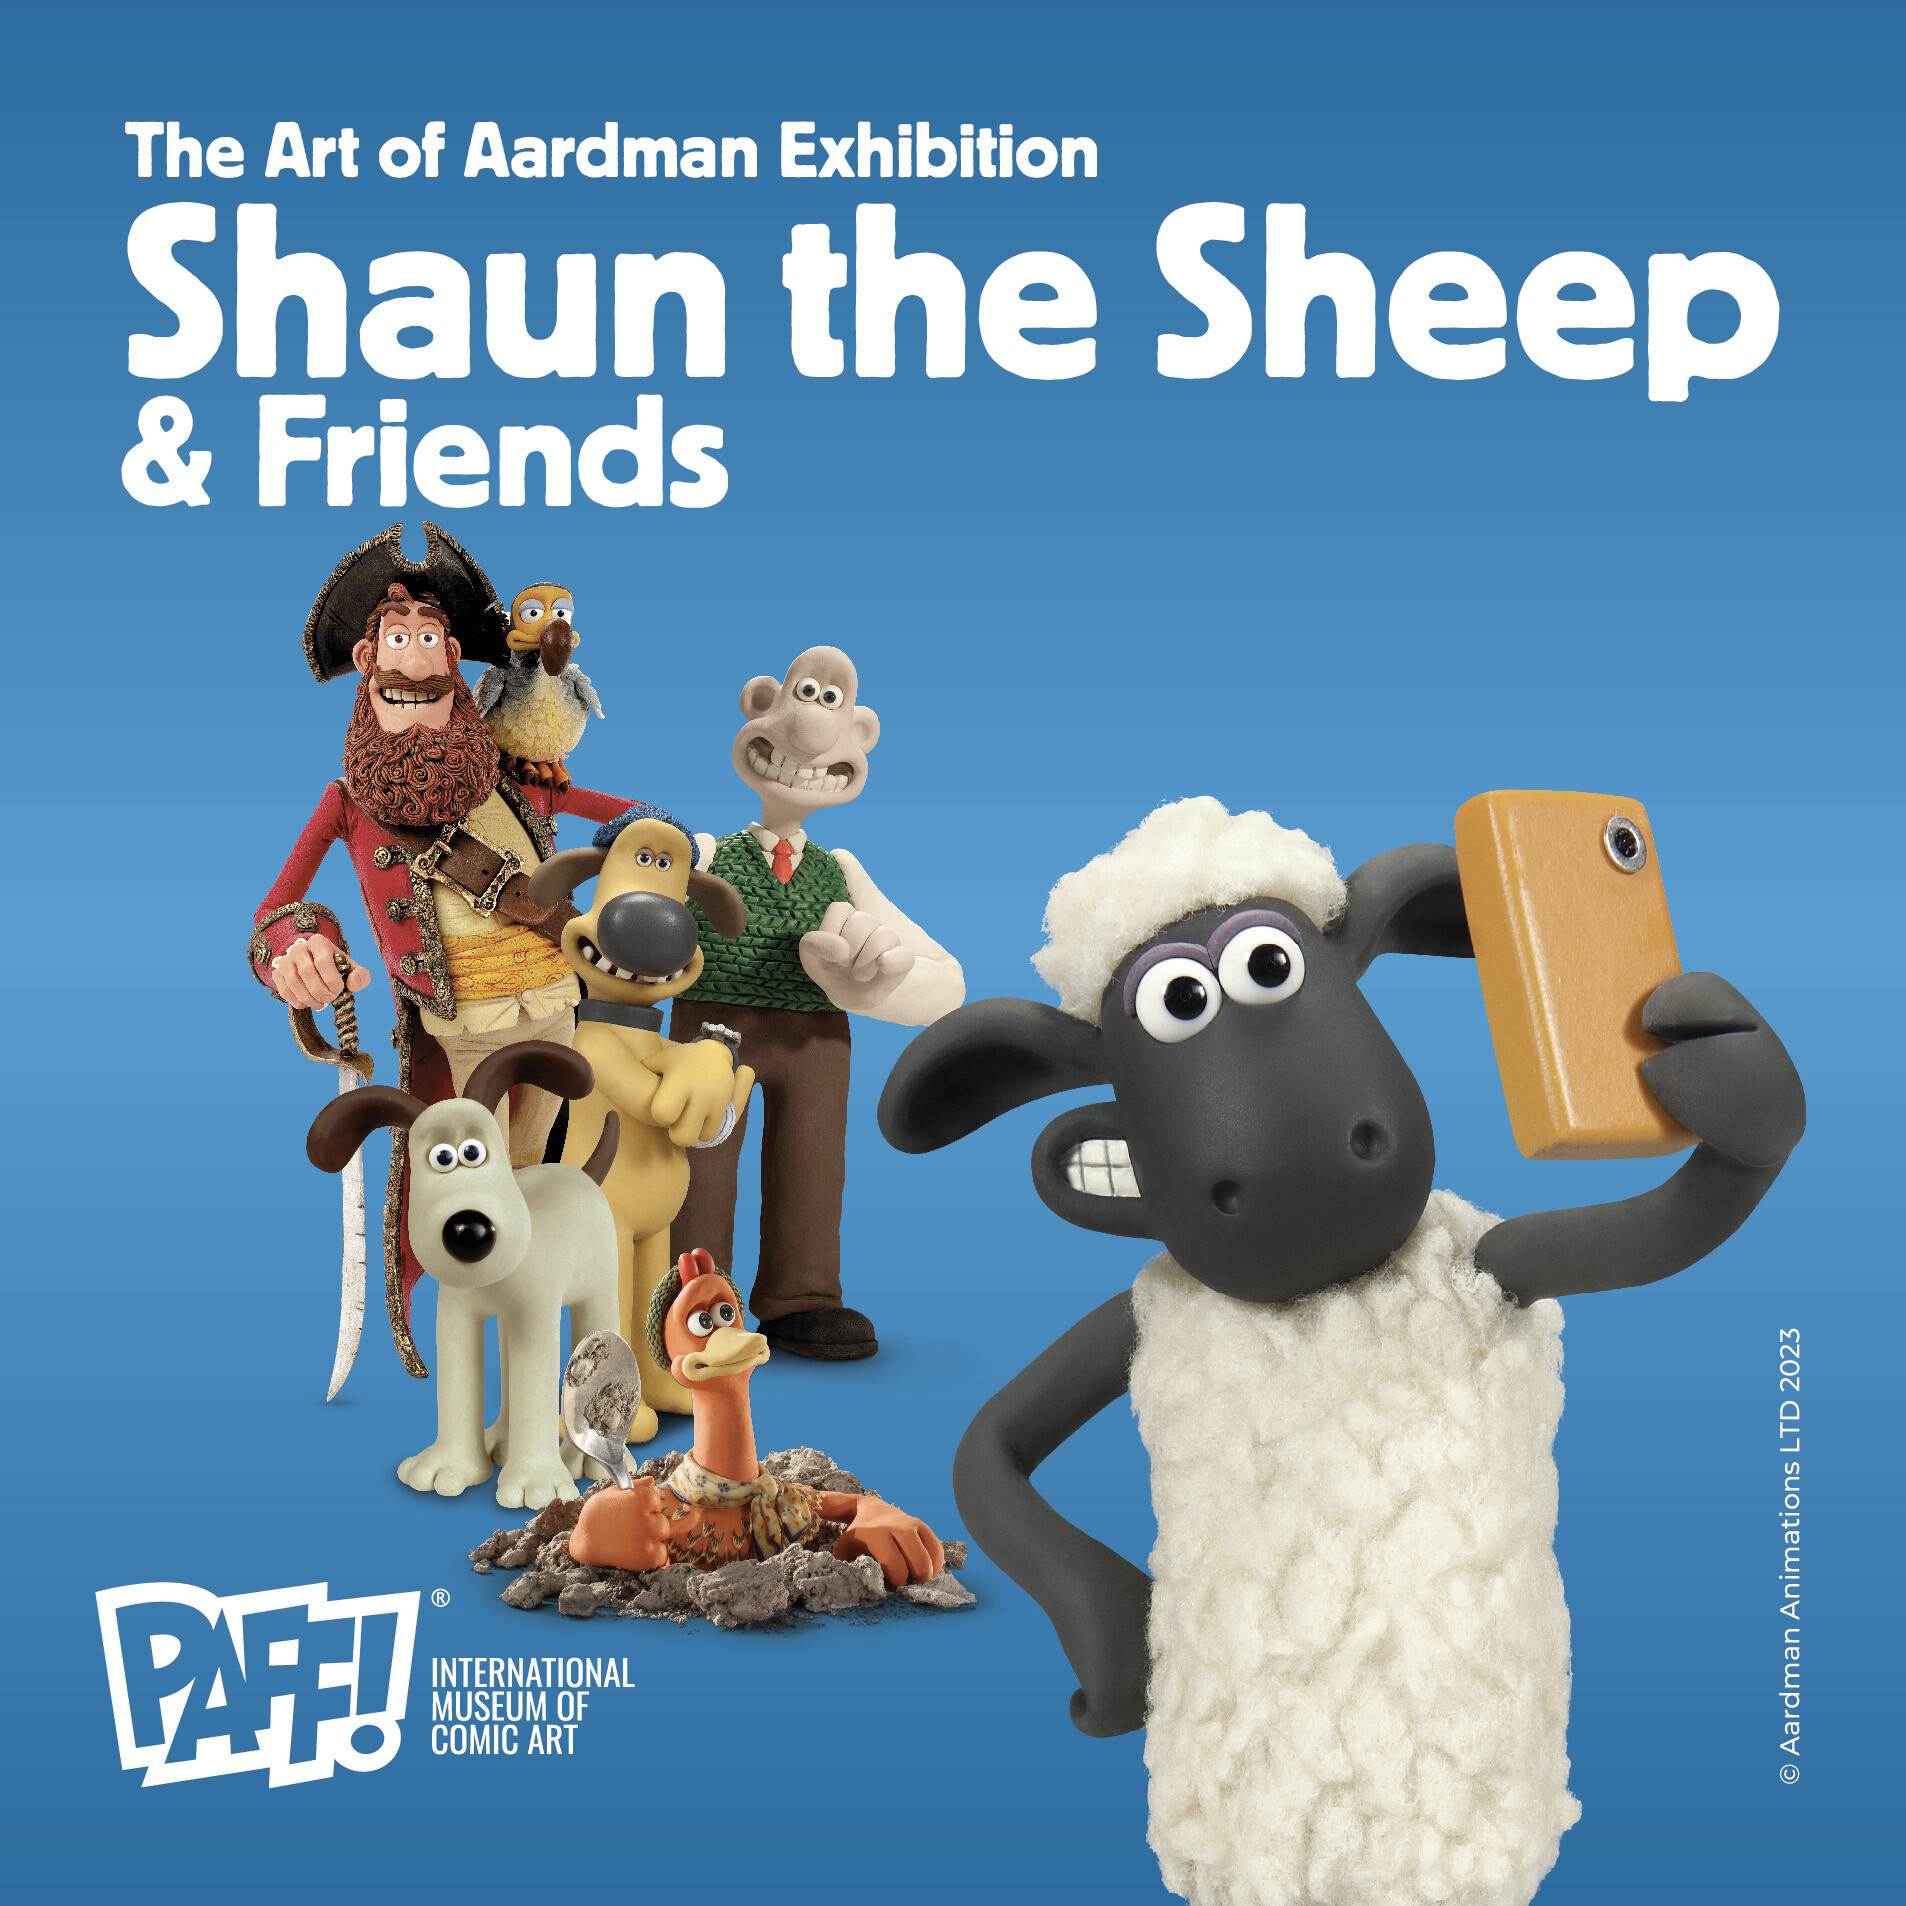 Shaun the Sheep & Friends  The Art of Aardman Exhibition in mostra al PAFF